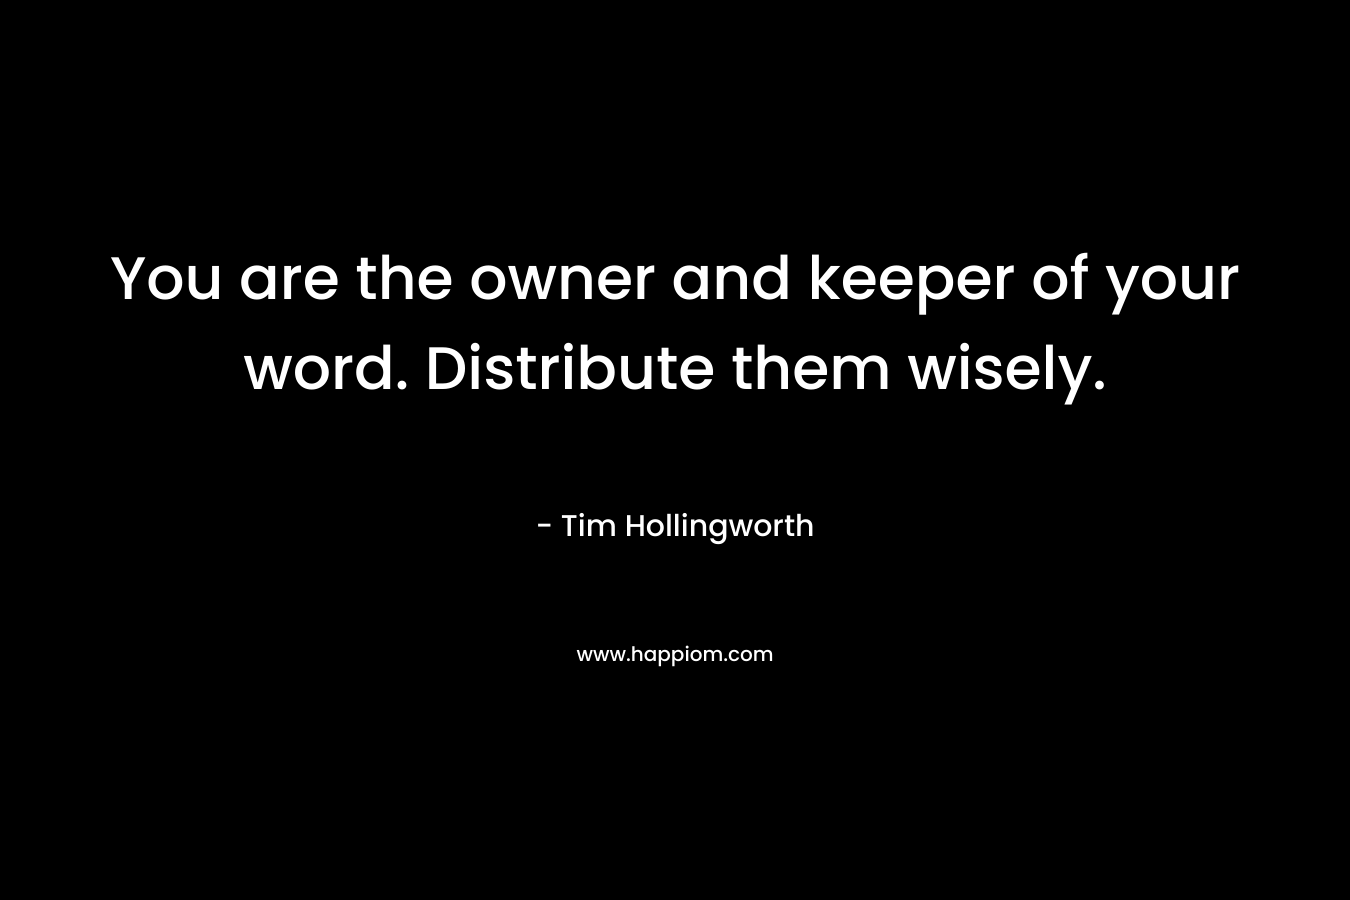 You are the owner and keeper of your word. Distribute them wisely. – Tim Hollingworth